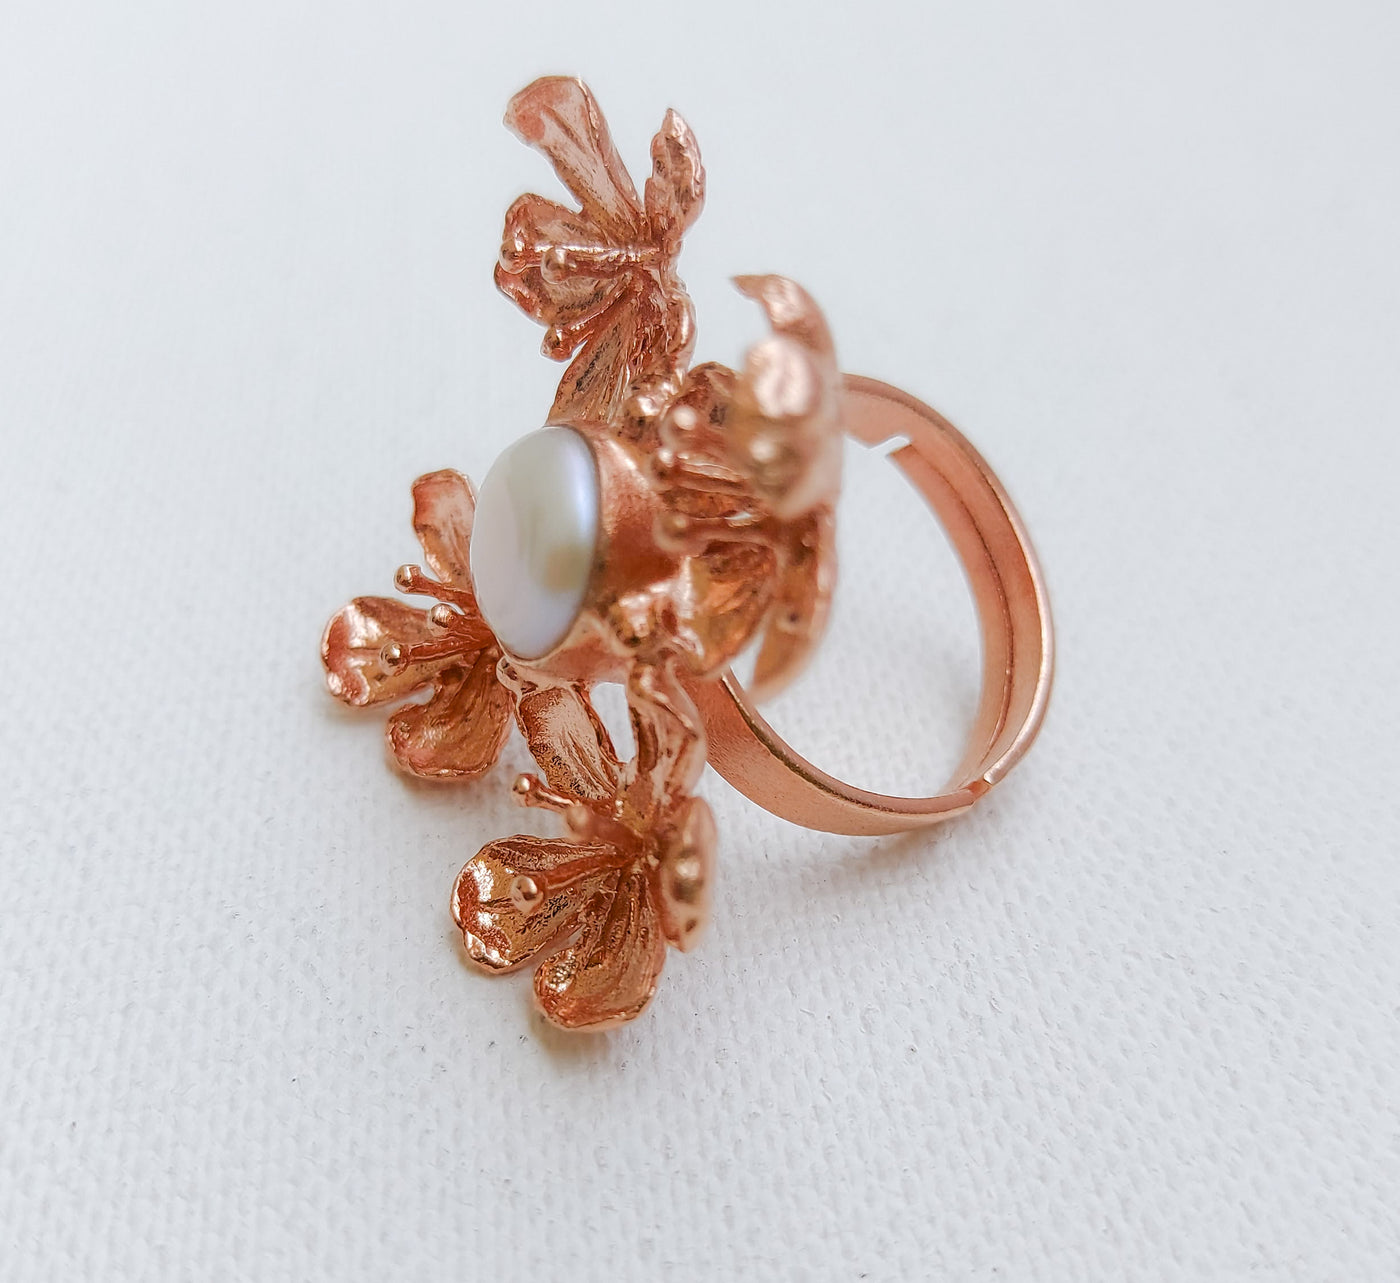 Floral & Pearl Ring